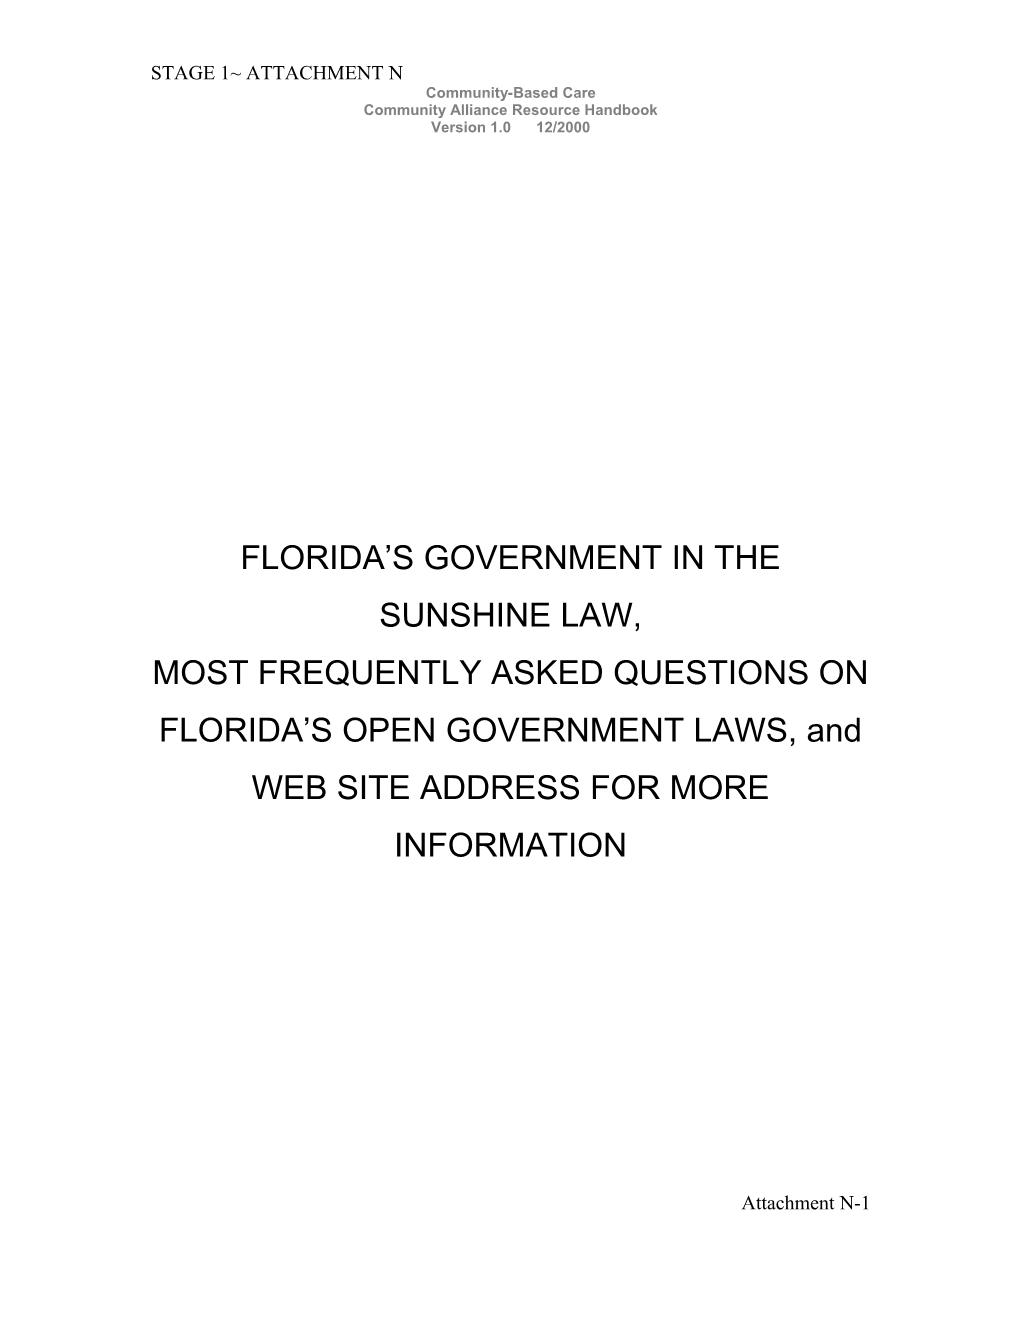 Florida S Government in the Sunshine Law